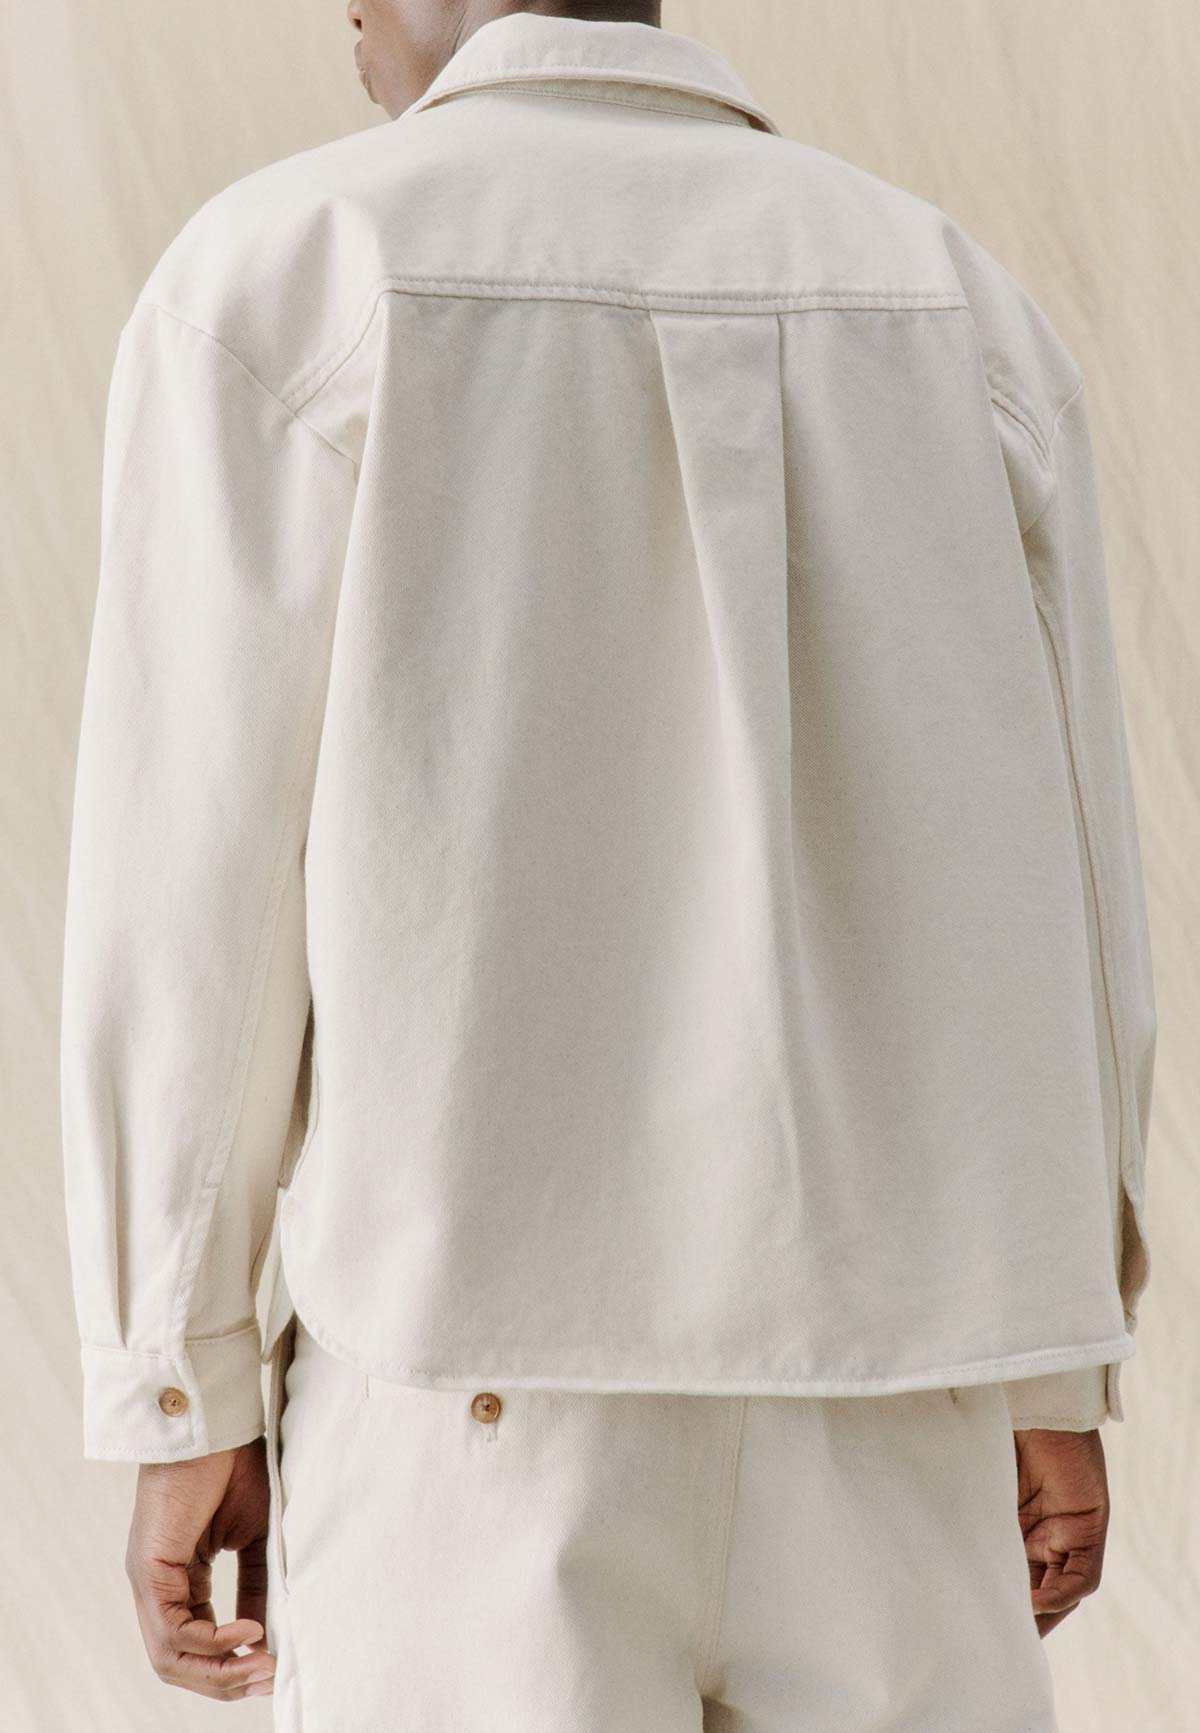 OBSTACLE OFF WHITE SHIRT - Moeon